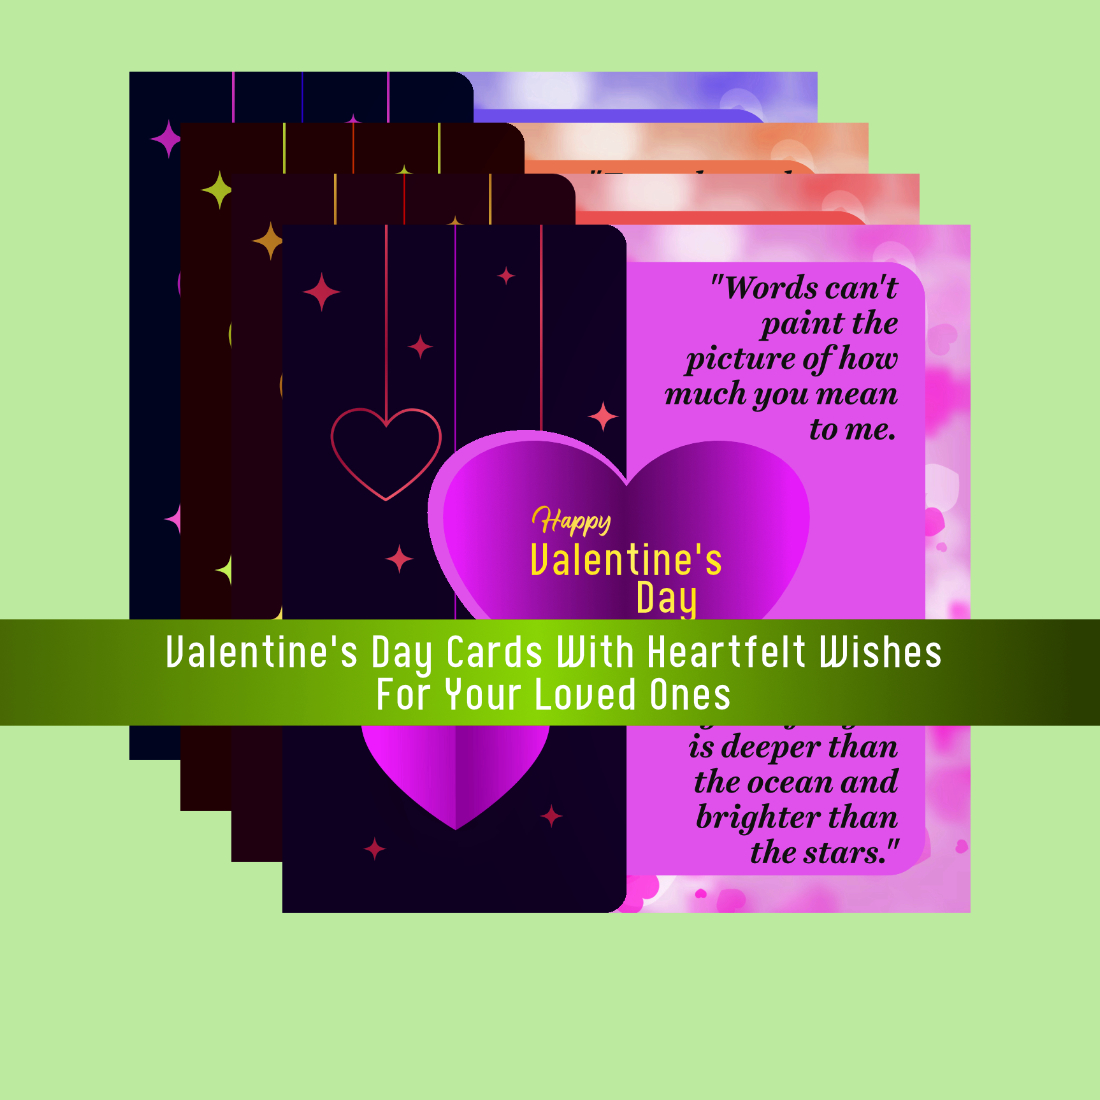 4 Beautifully Designed Vector Valentine’s Day Cards with Heartfelt Wishes for Your Loved Ones, Friends and Well-Wishers preview image.